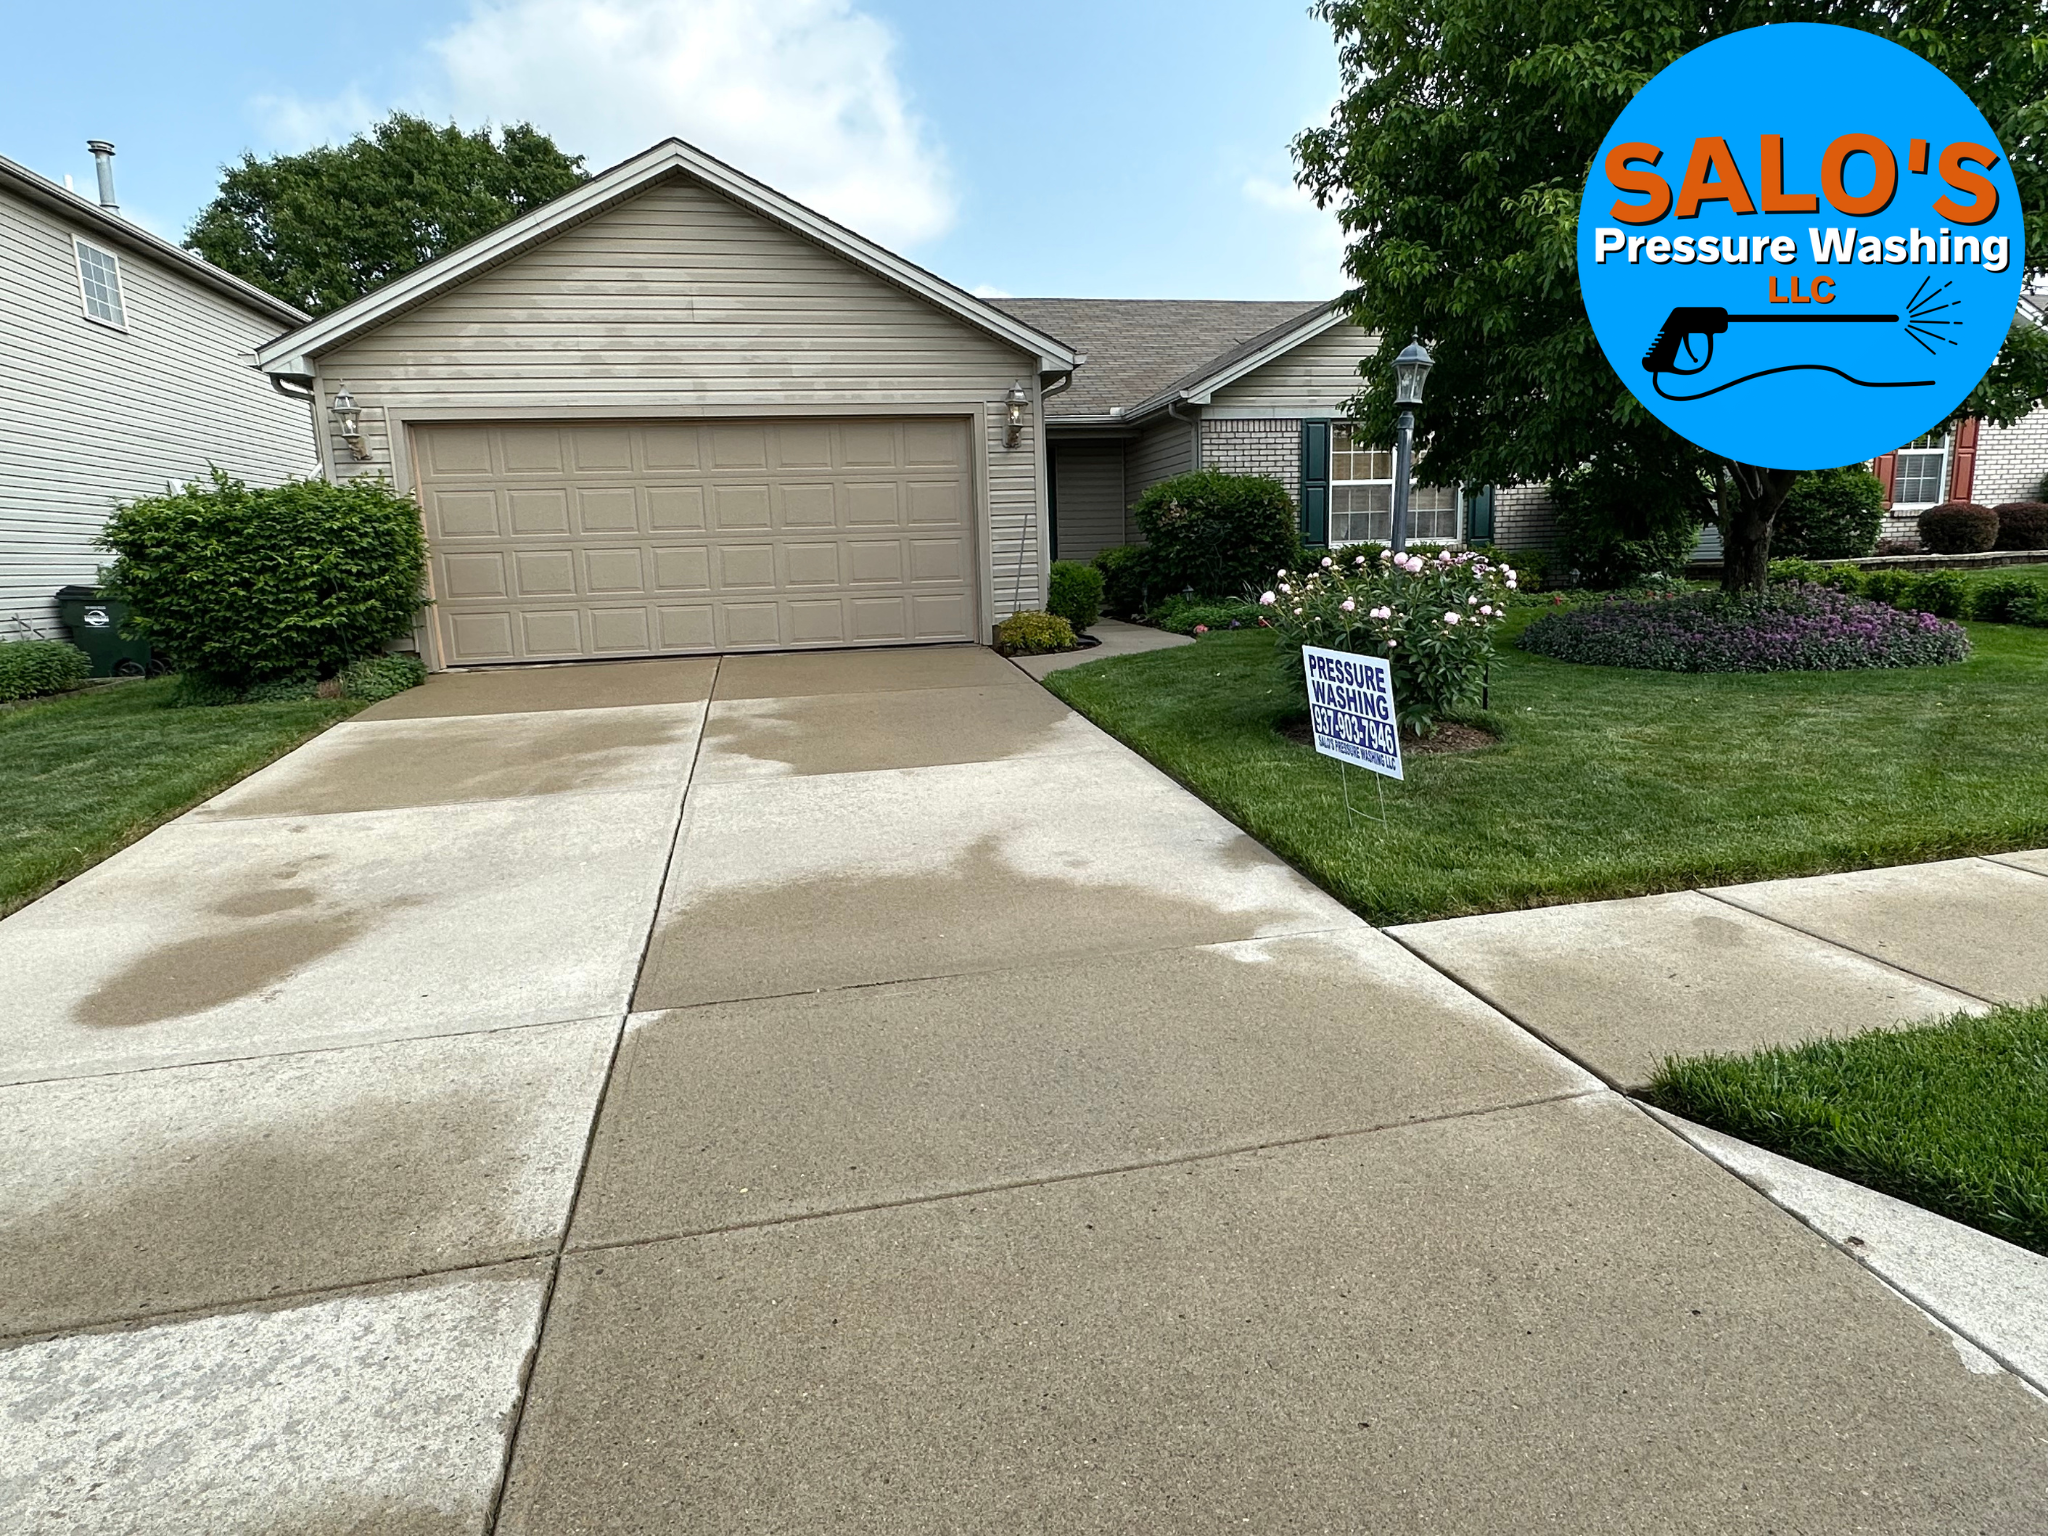 Professional House Washing and Driveway Cleaning in Miamisburg, Ohio